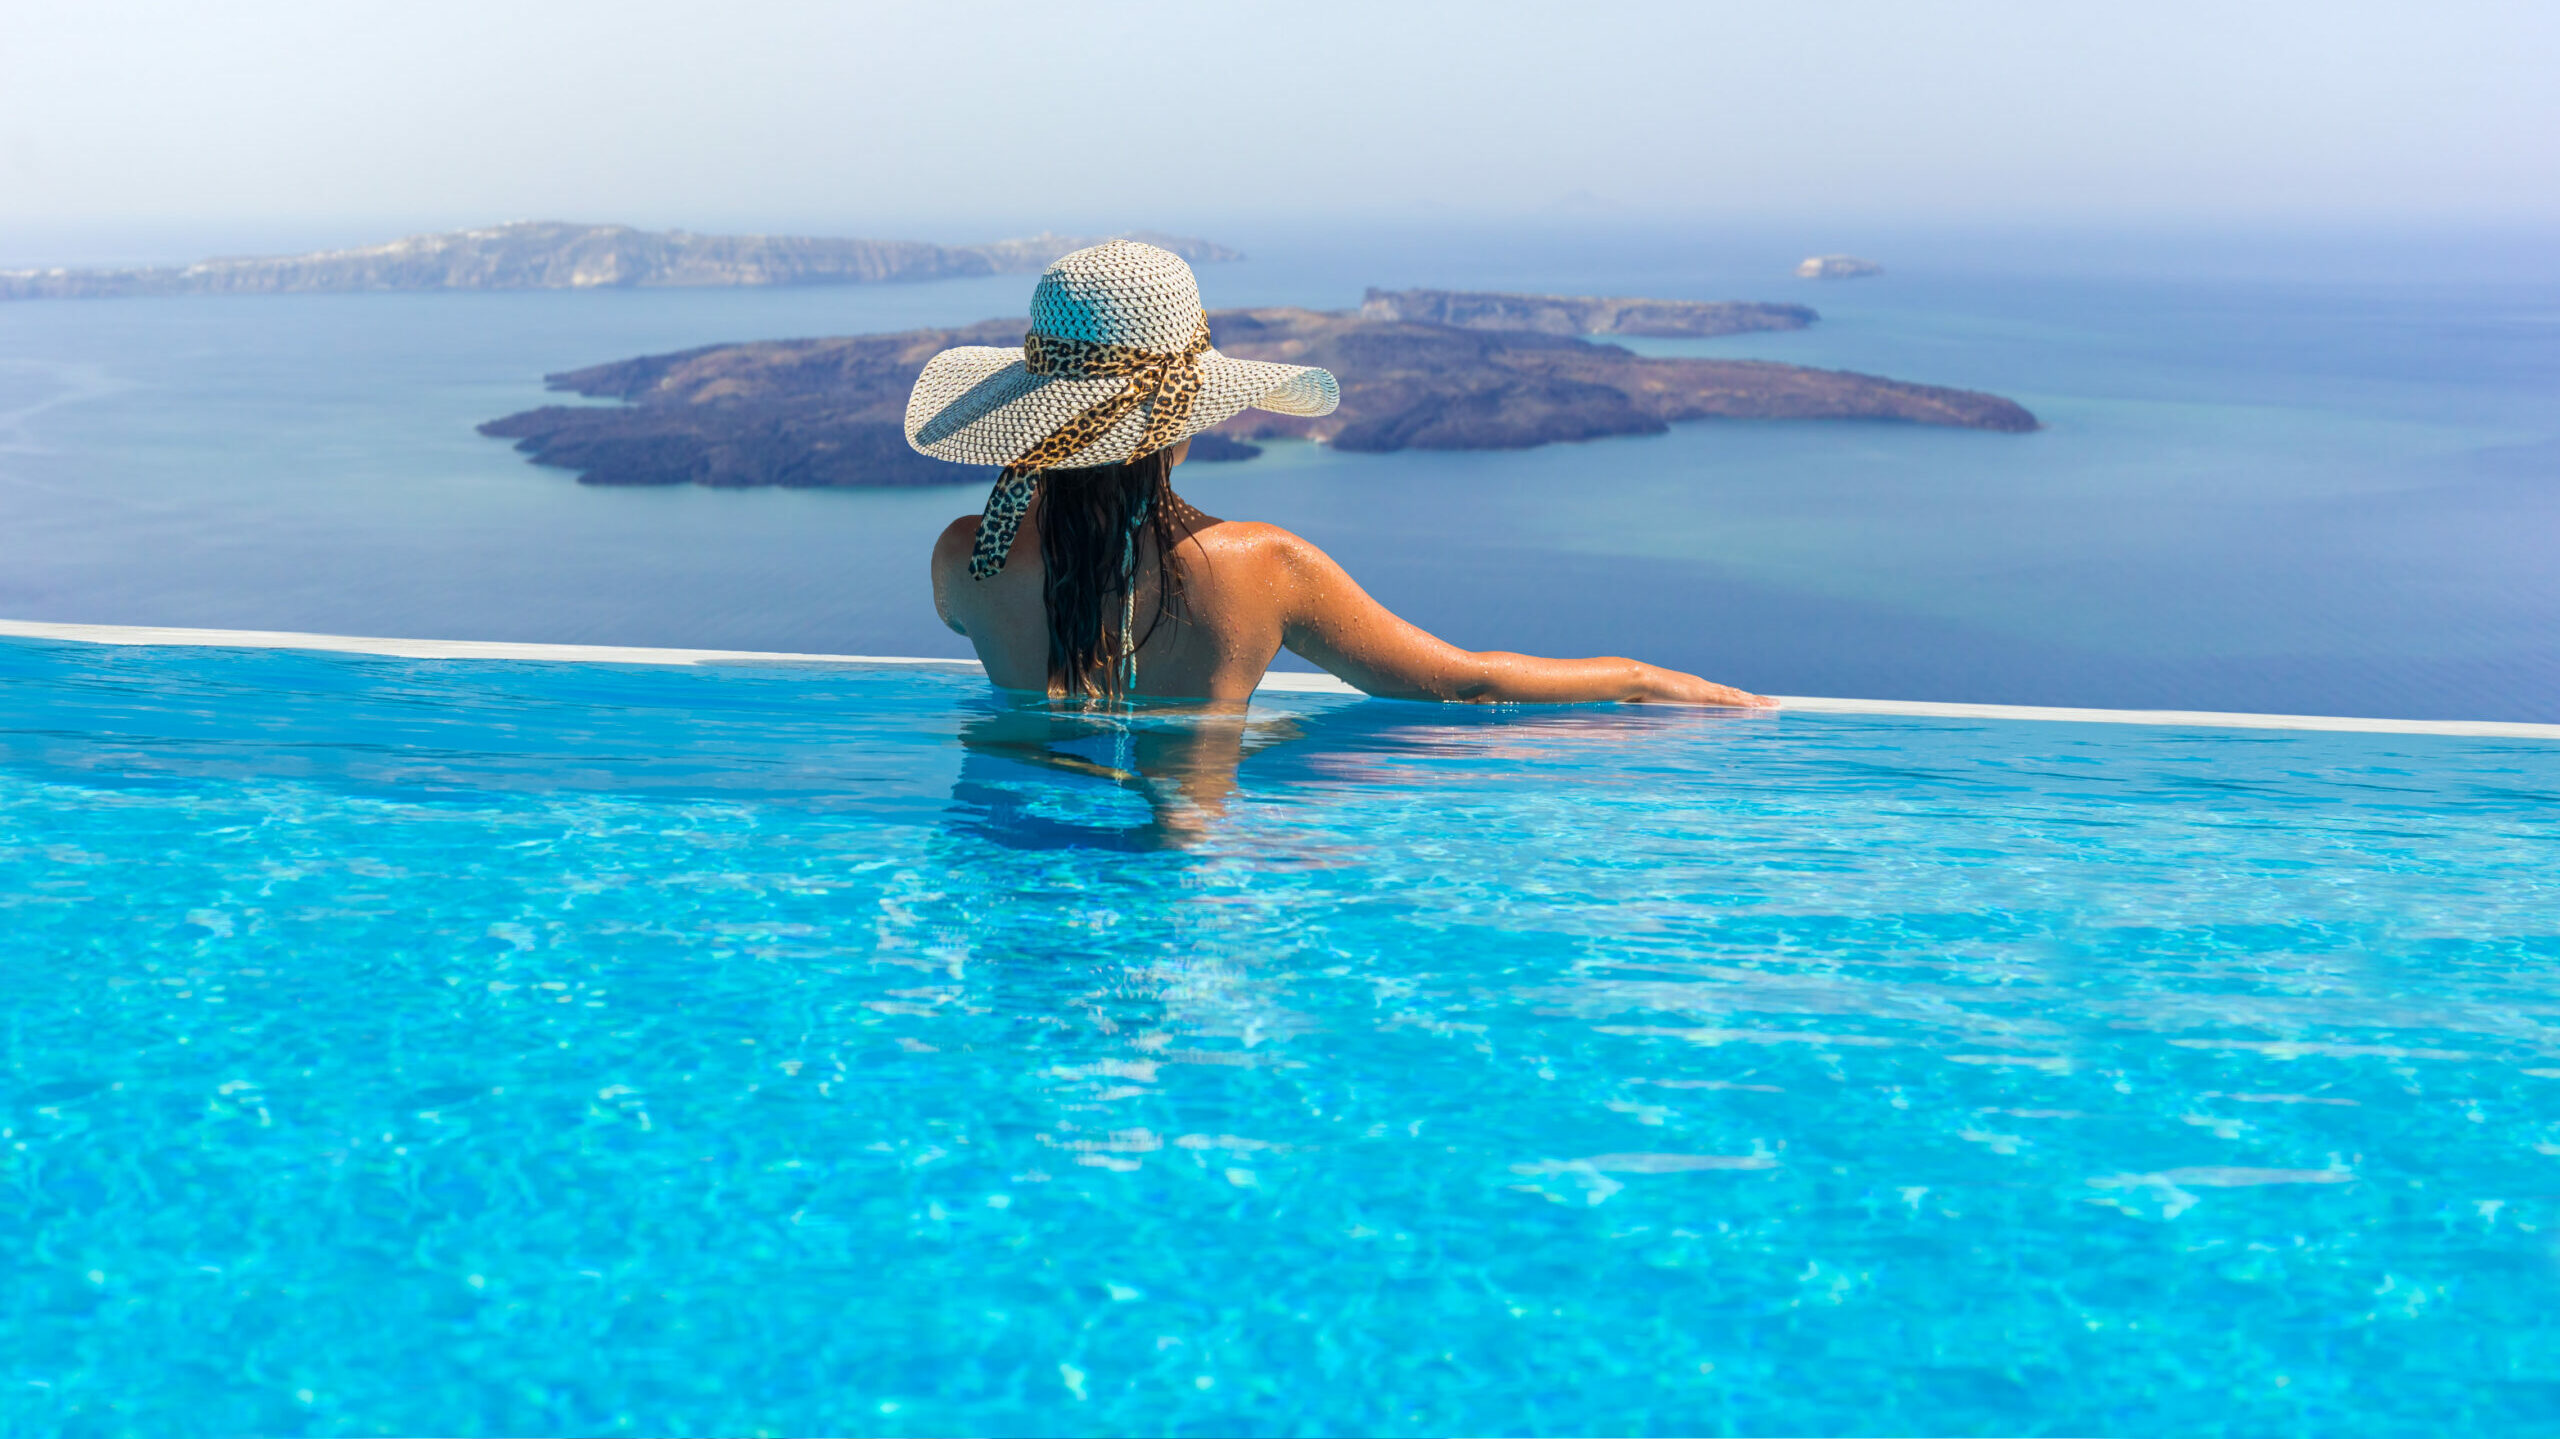 Santorini: The luxurious hotel where you go out on the balcony swimming